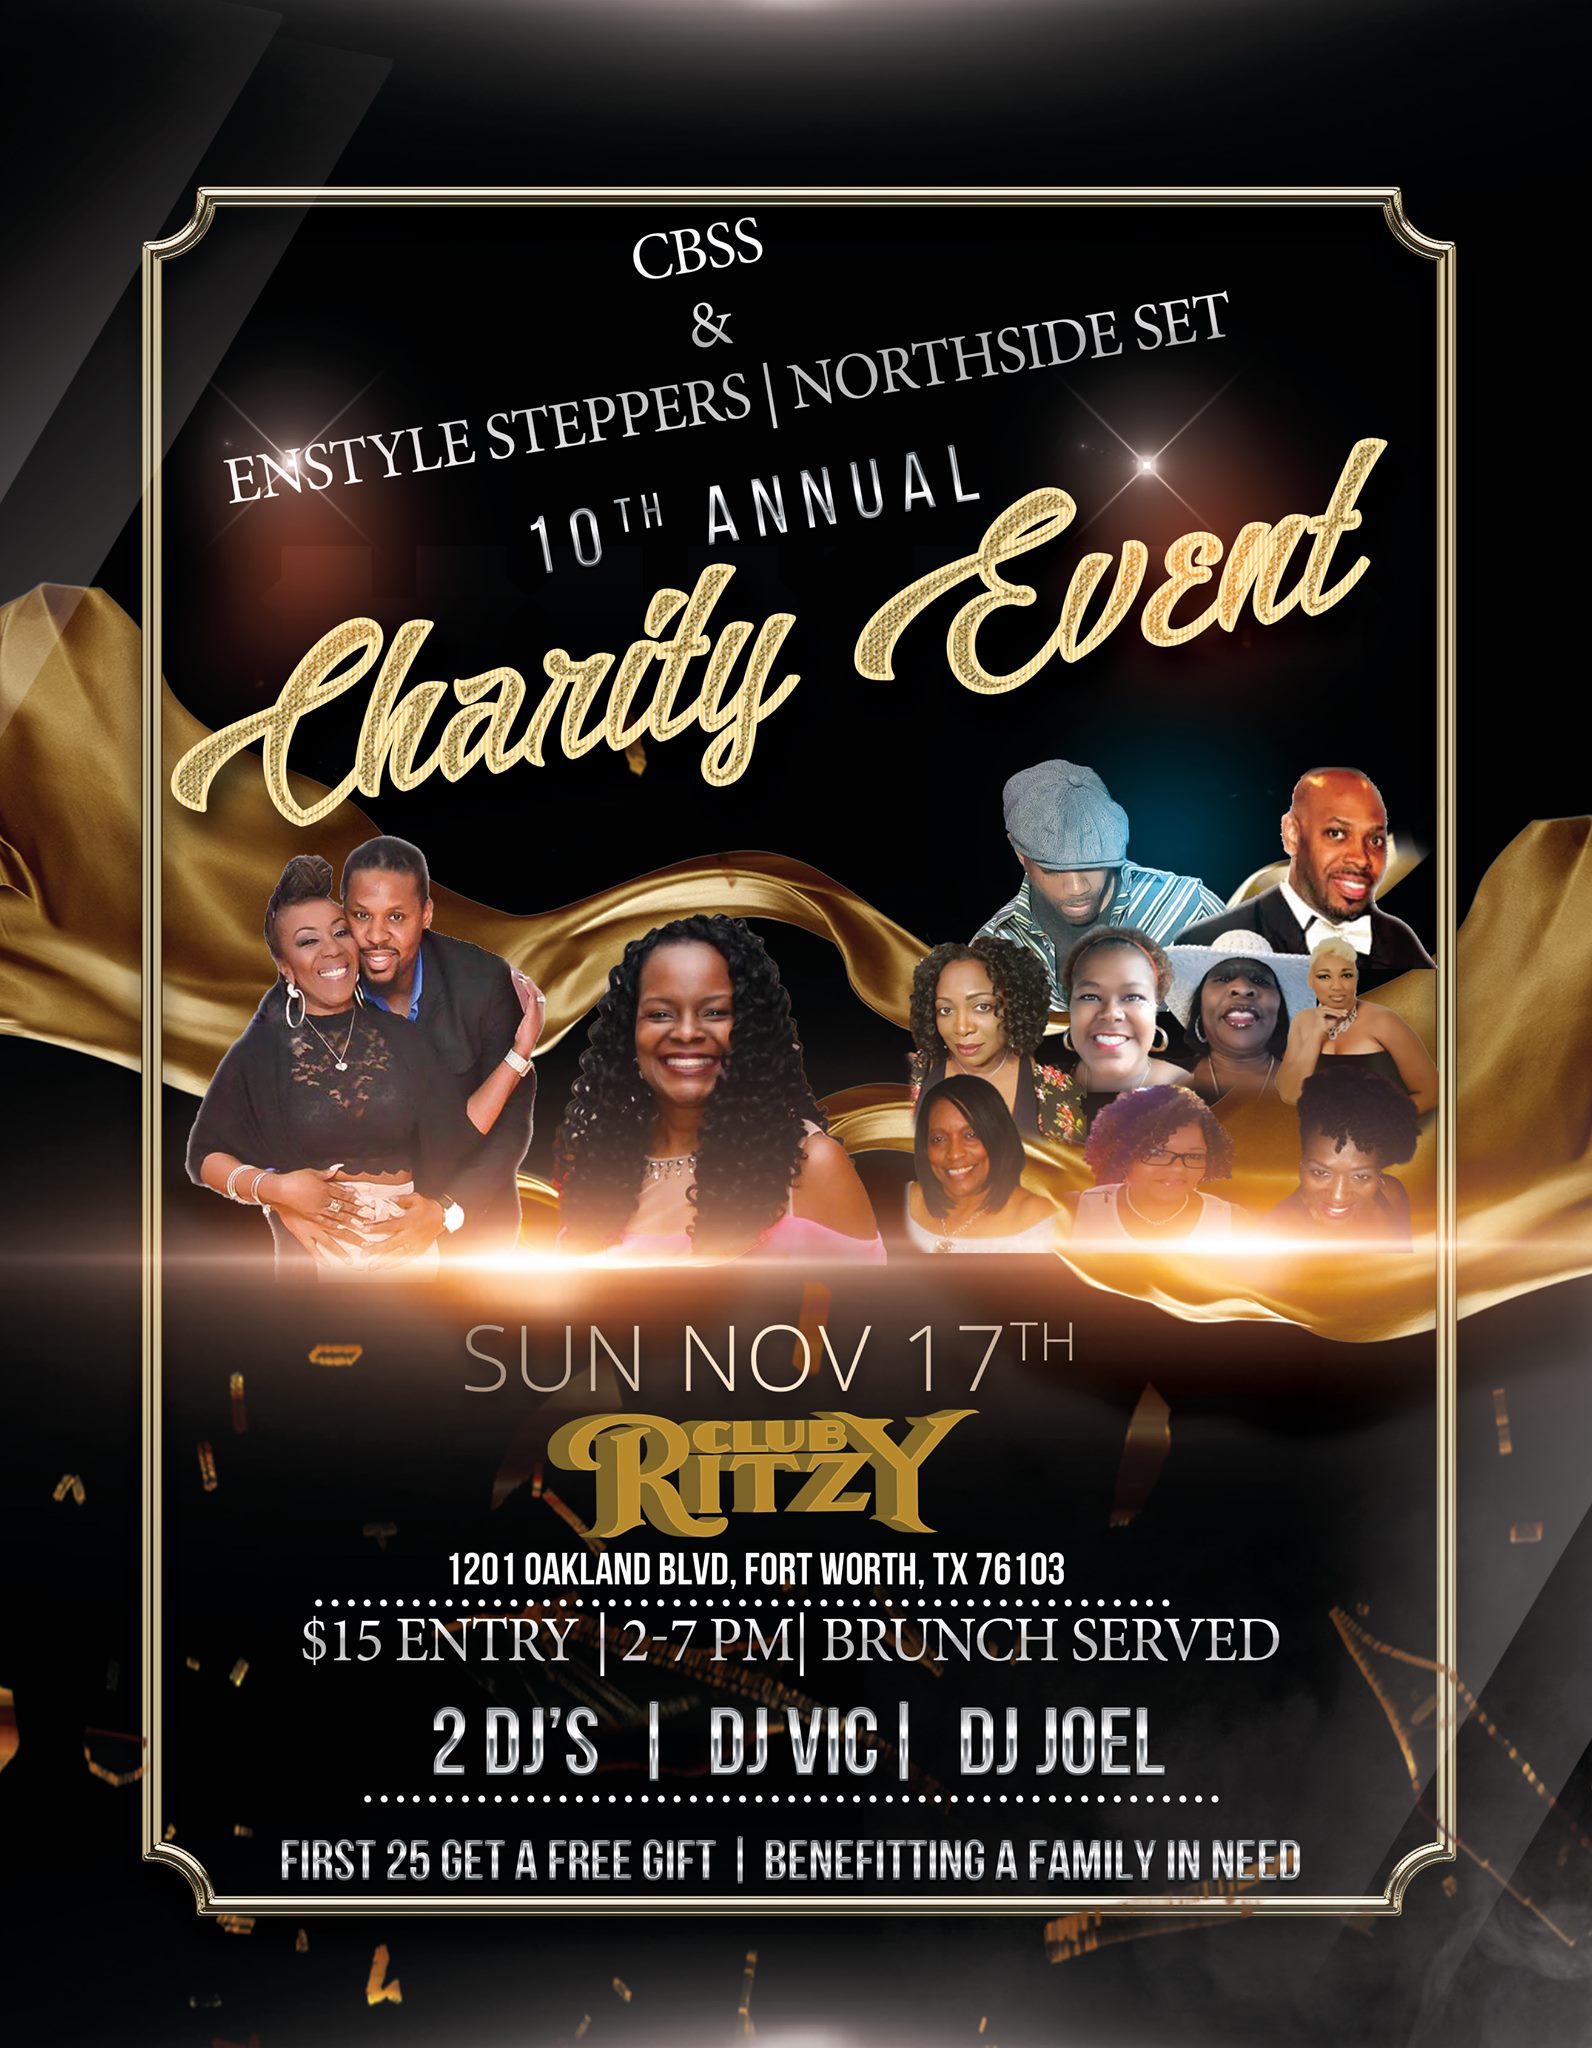 10th Annual CBSS, Enstyle Steppers & Northside Set Charity Dance – Fort